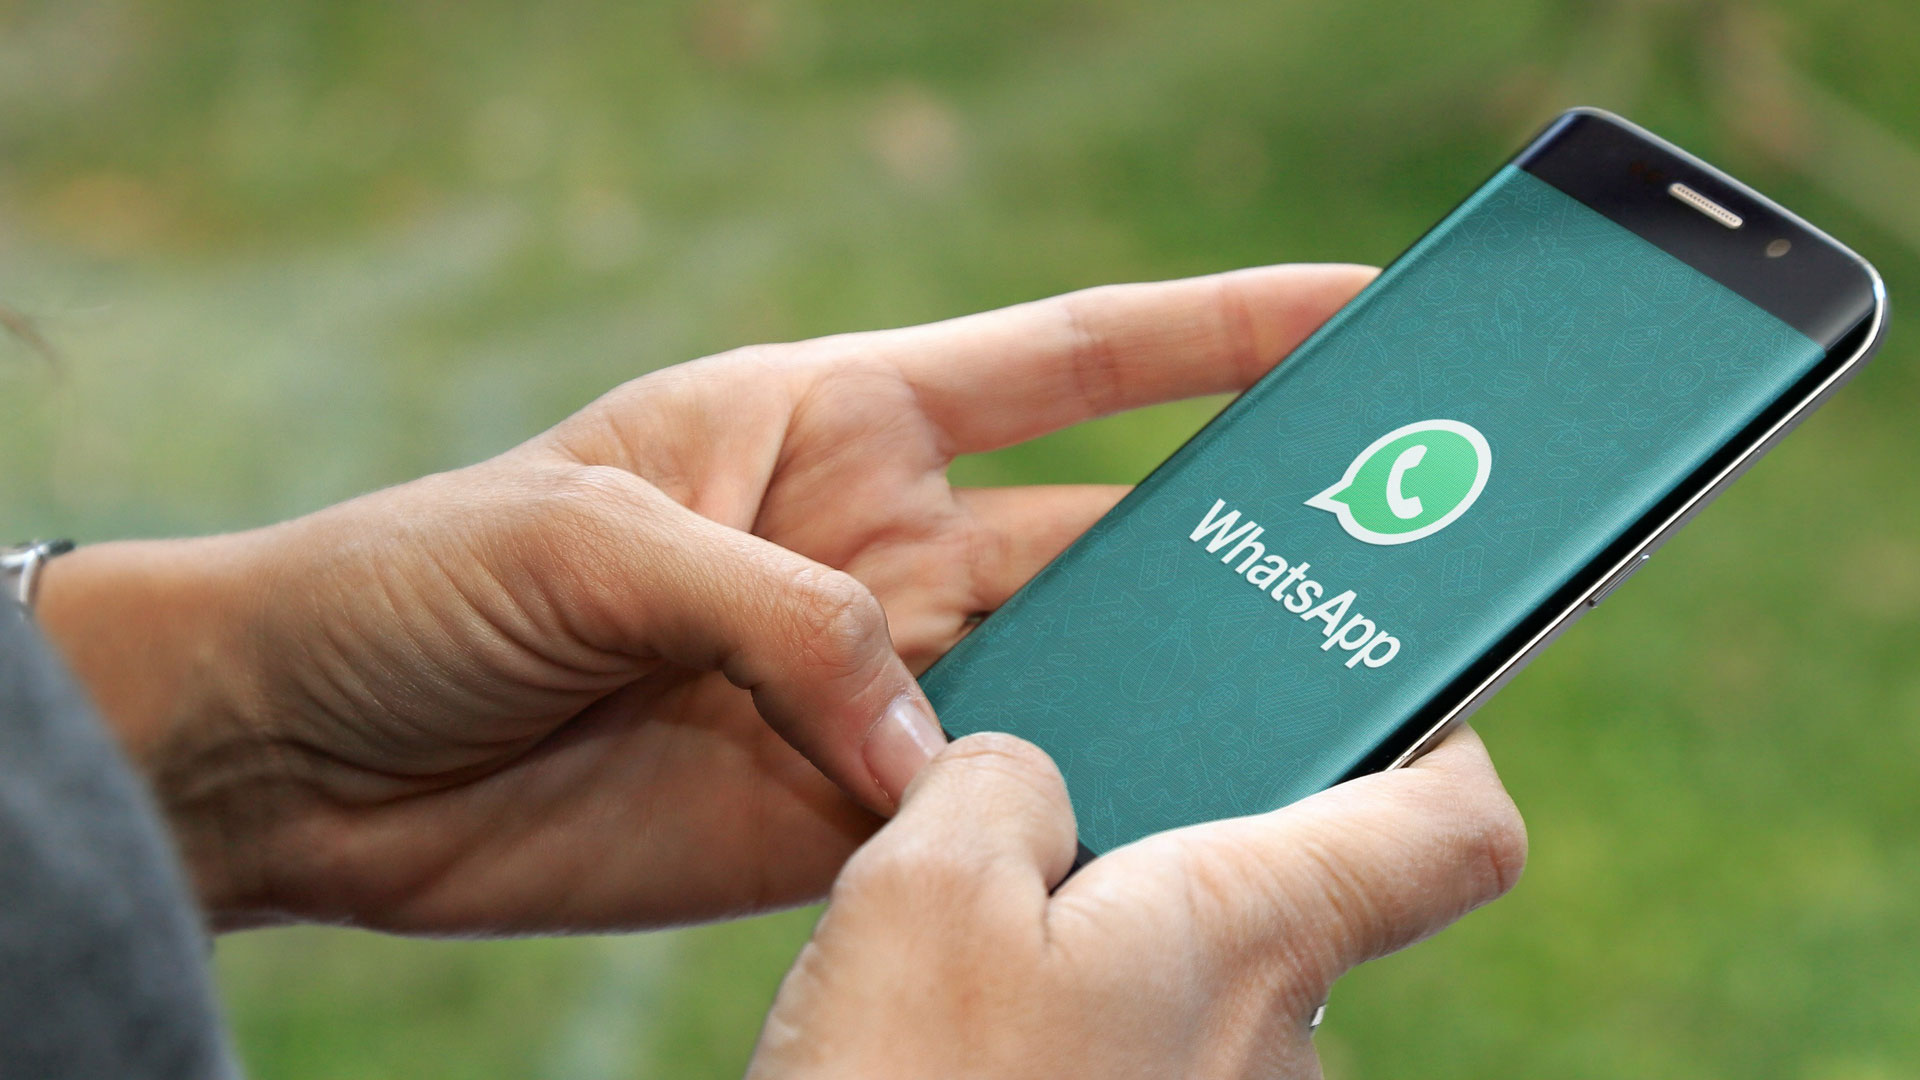 How does WhatsApp enable User Data Collection